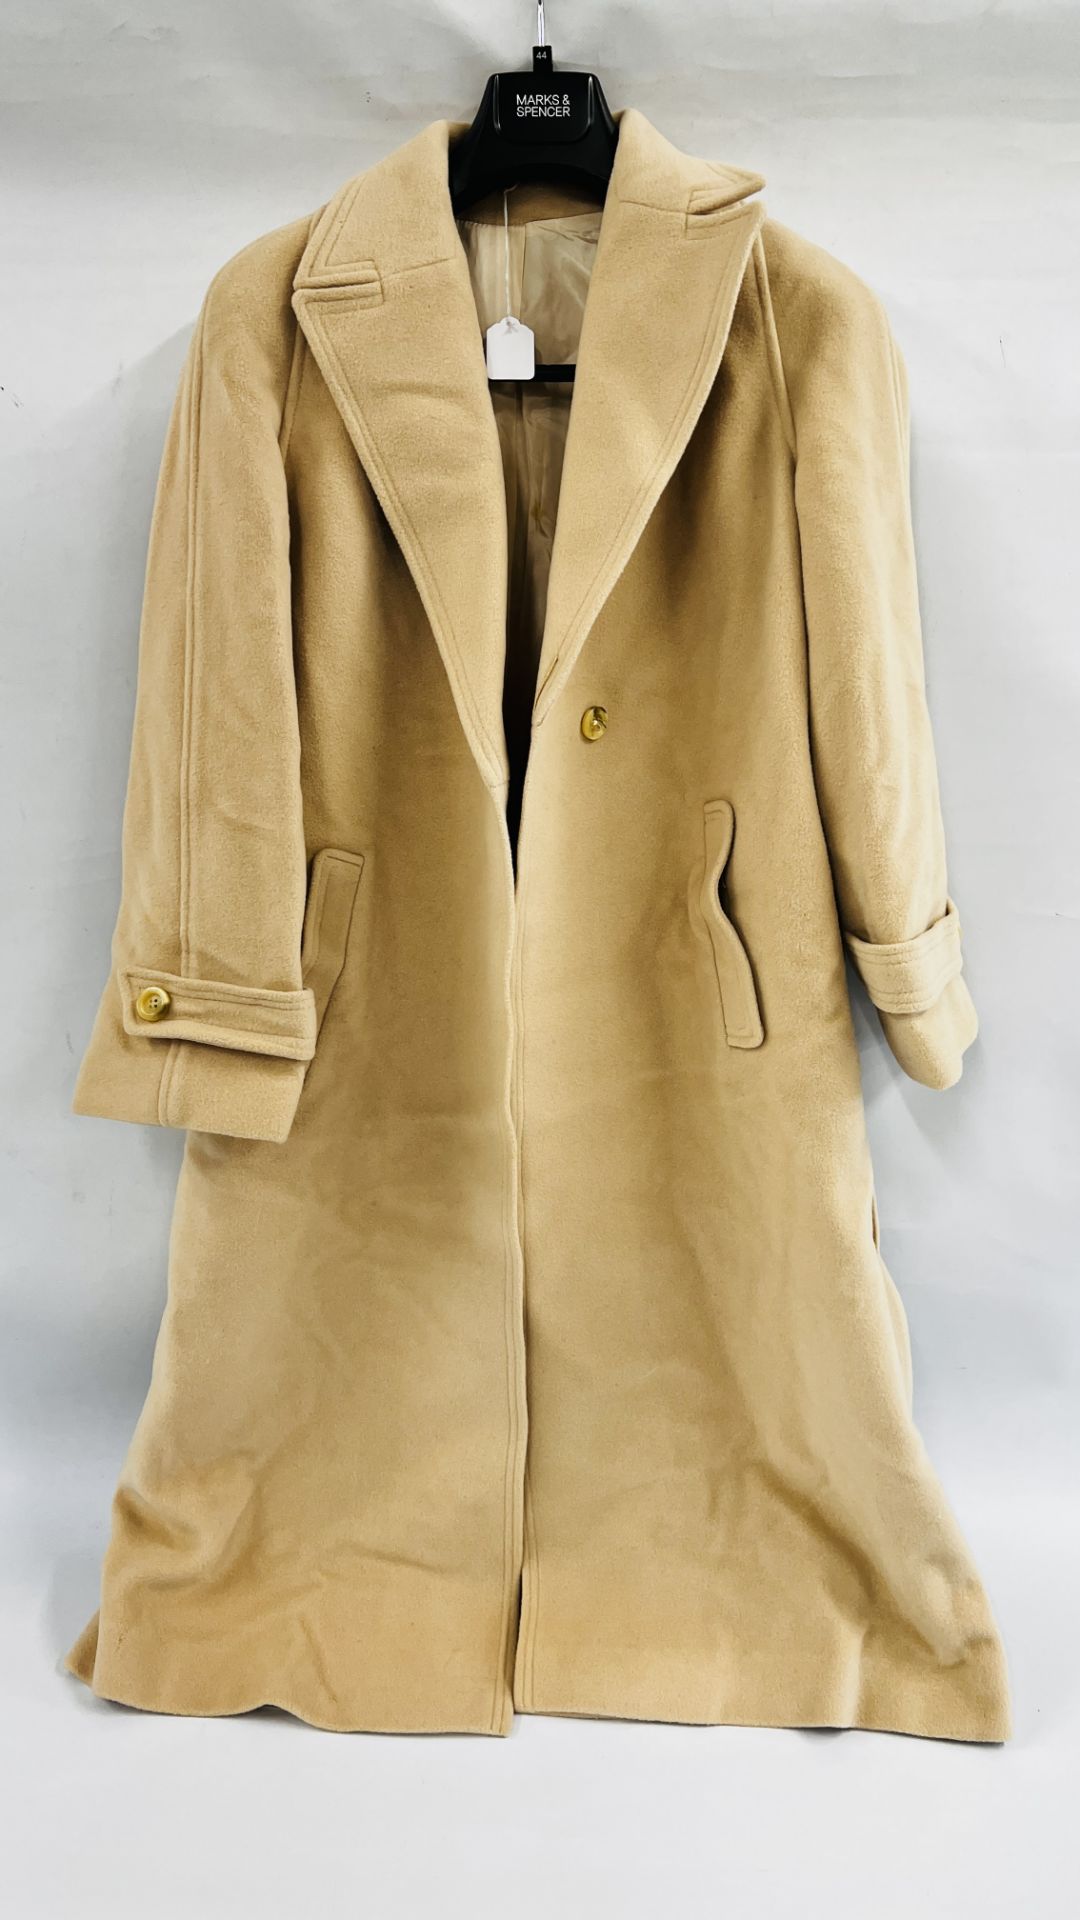 A LADIES CASHMERE AND WOOL COAT MARKED "CZARINA" (SIZE NOT SPECIFIED).